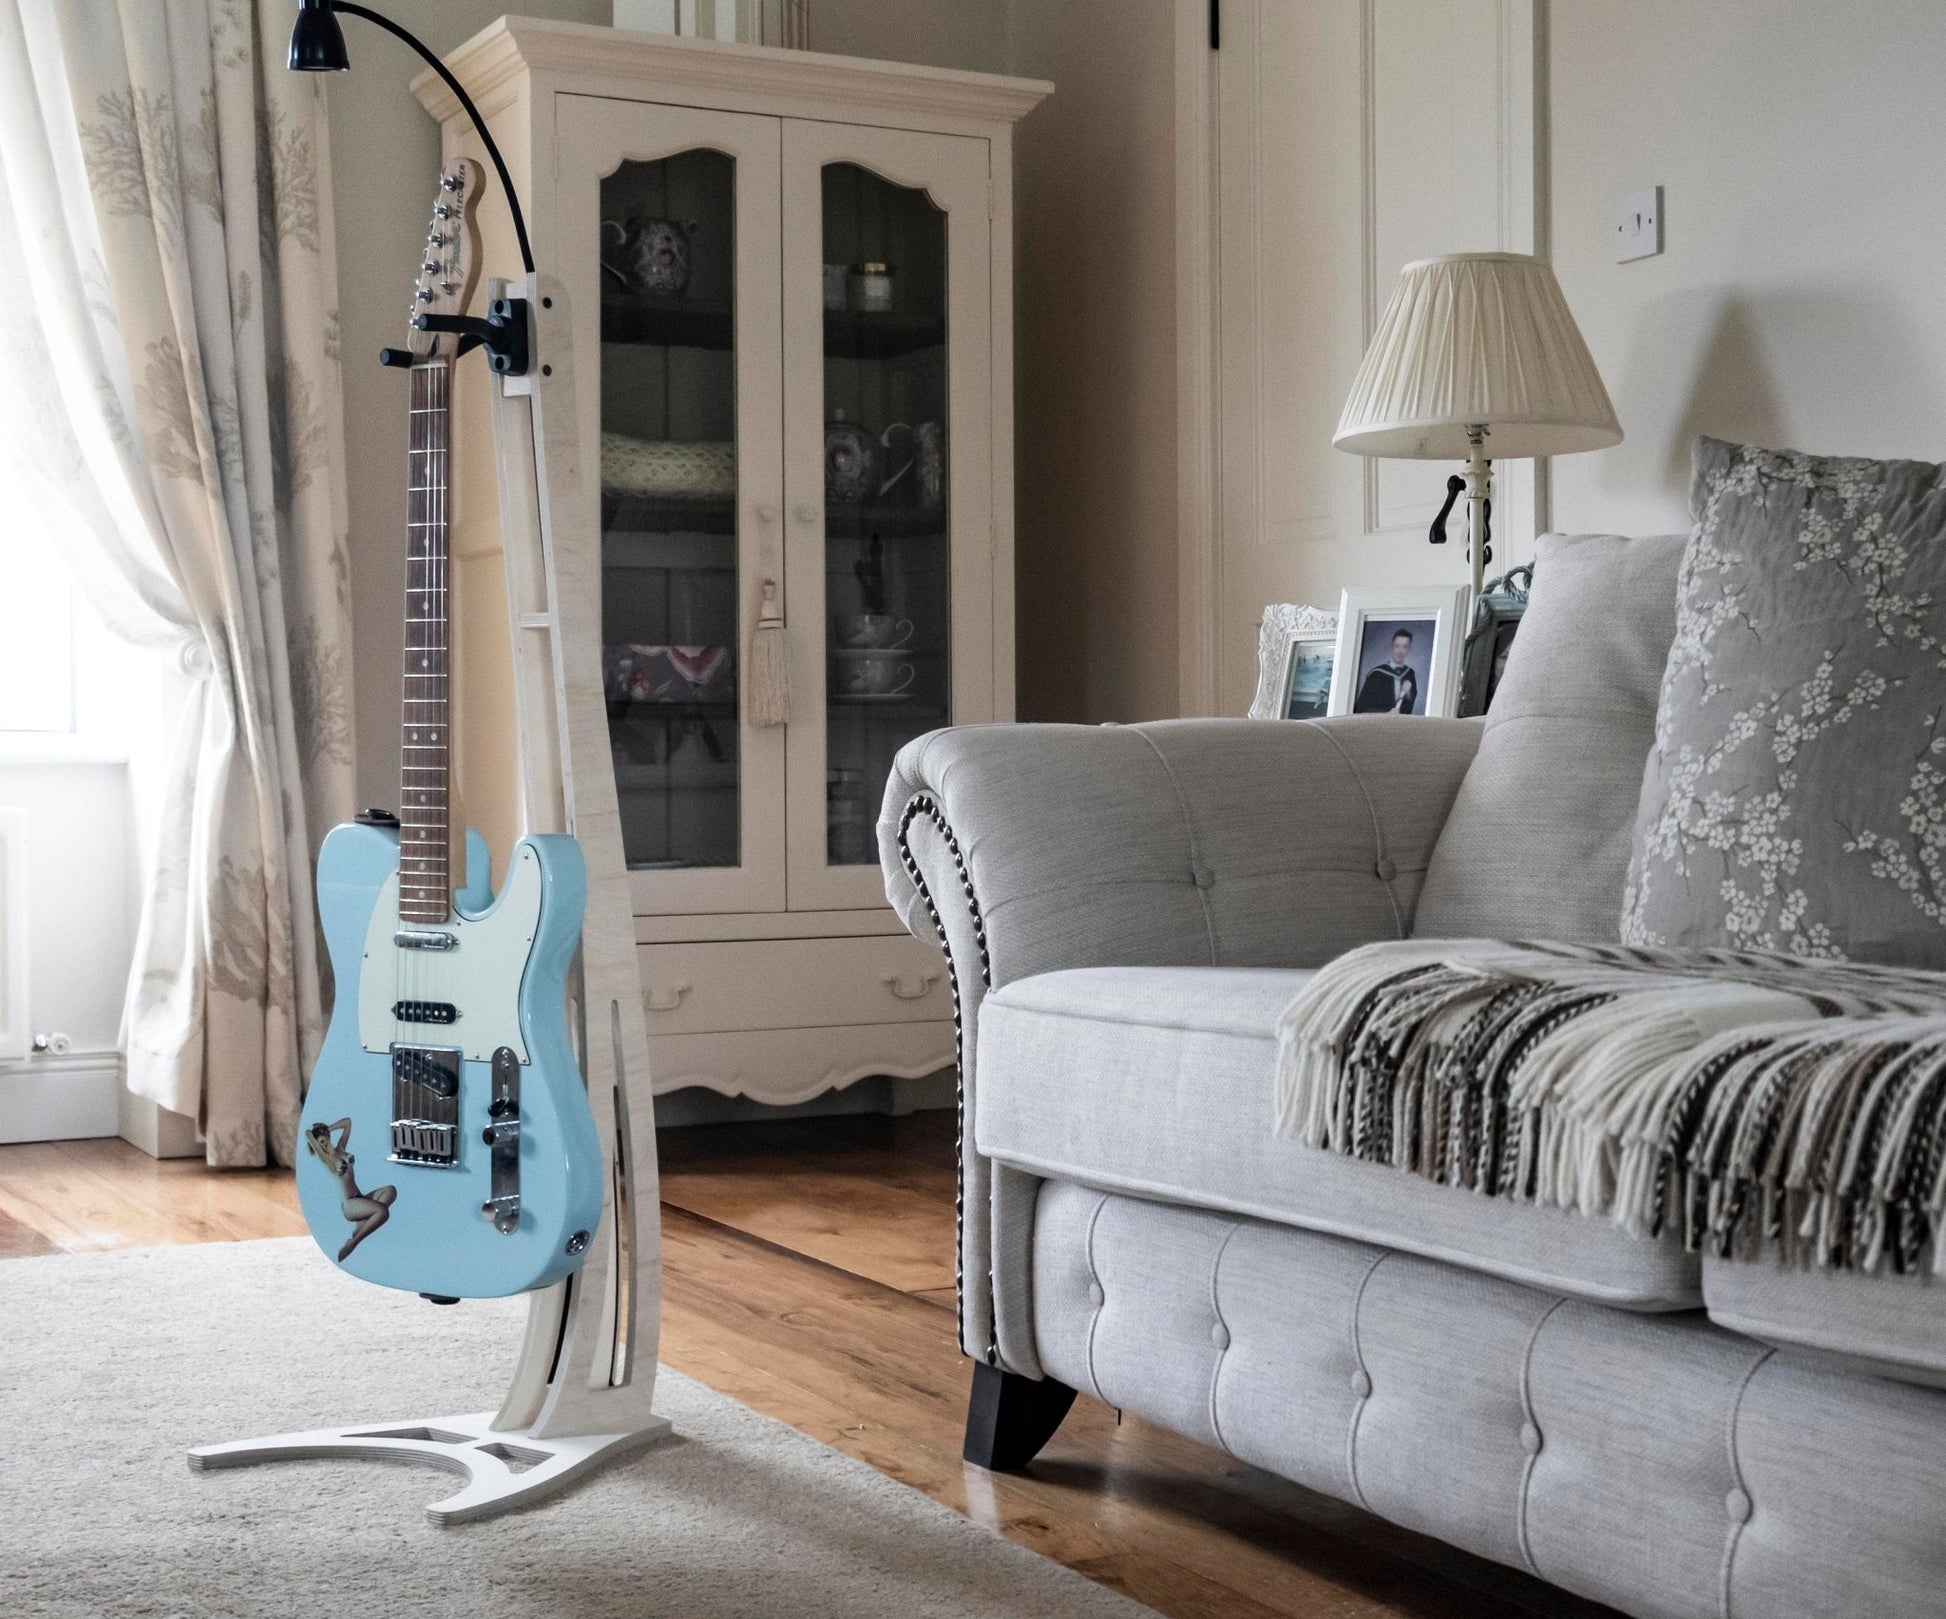 Guitar Stand With Down Light, Hanging Stand Made In Ireland, Light included Illuminated (CUSTOM) - Caulfield Composites